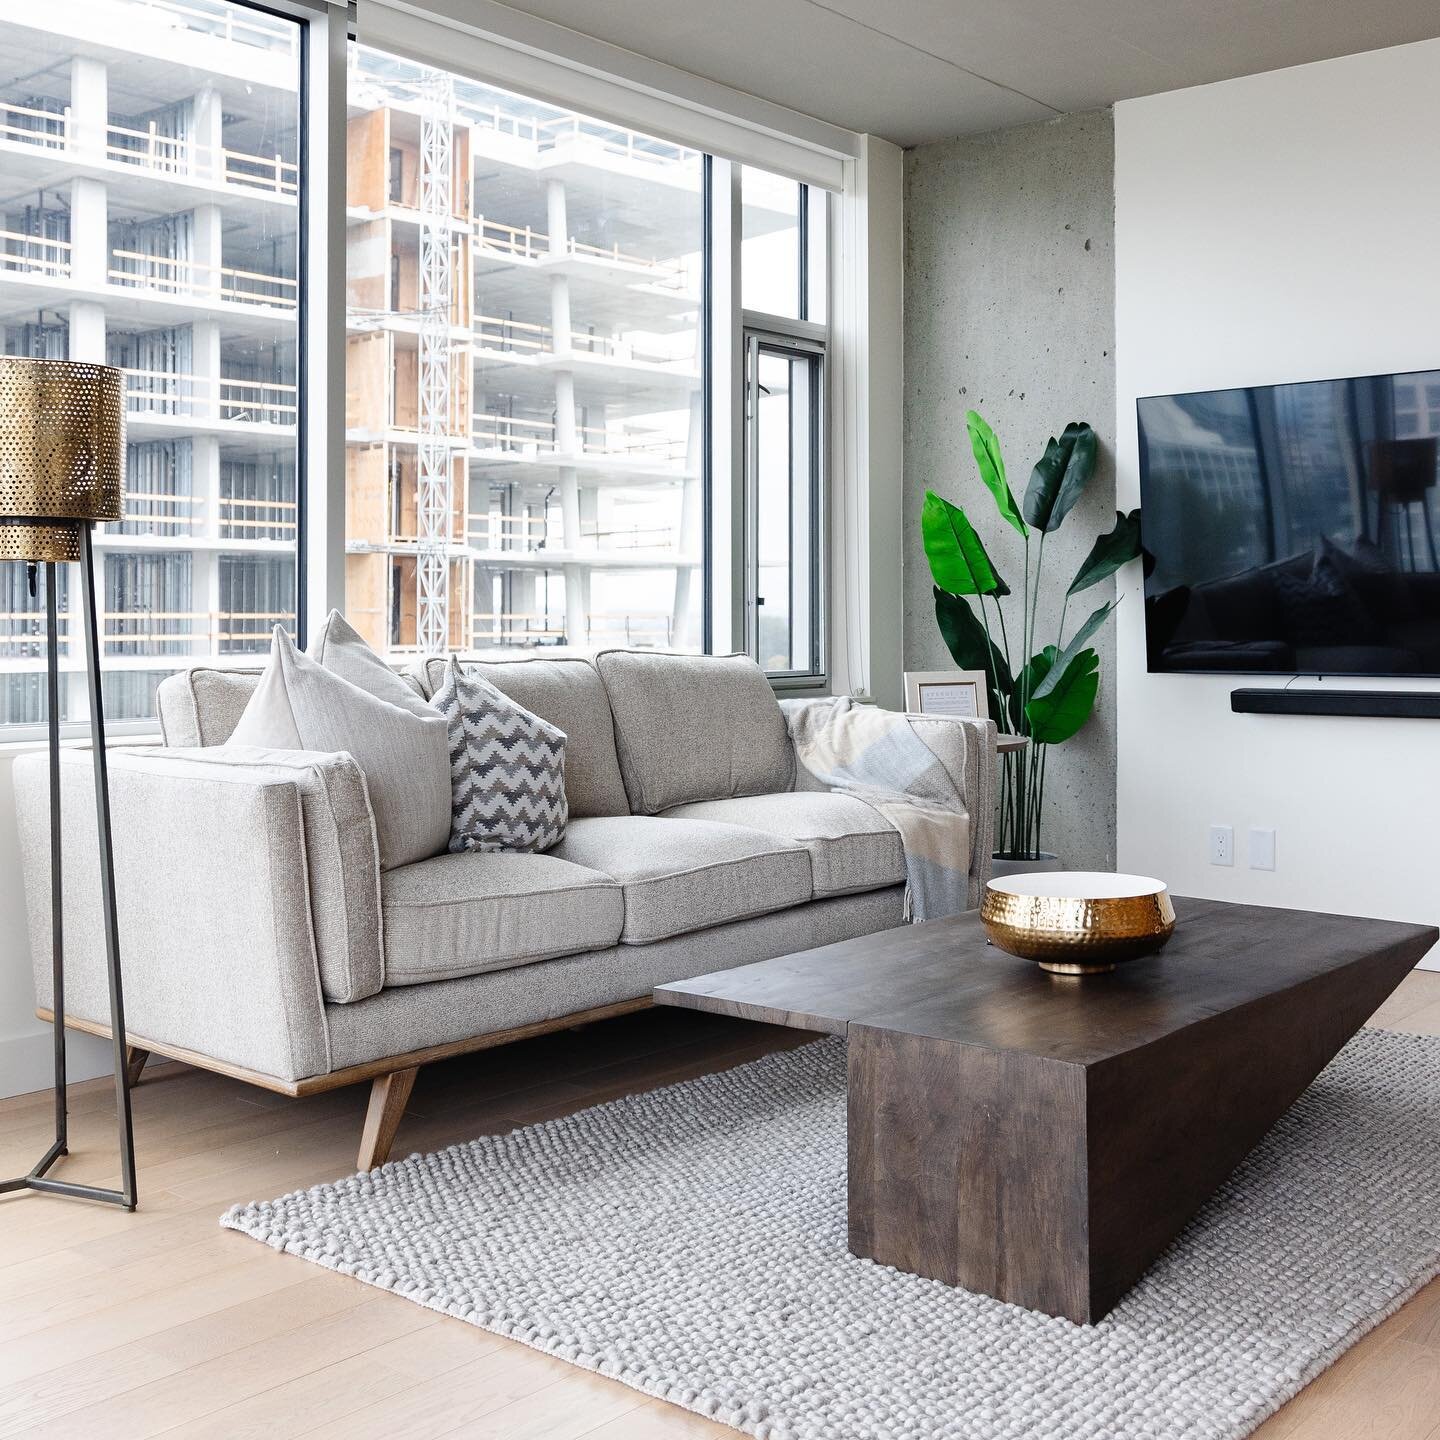 When designing Vacation Rentals, simplicity in furniture is the key - at Avenue One we love a modern minimalist approach, here is a one bedroom condo that we furnished for our clients Vacation Rental at the @989victoria.

At Avenue One we have experi